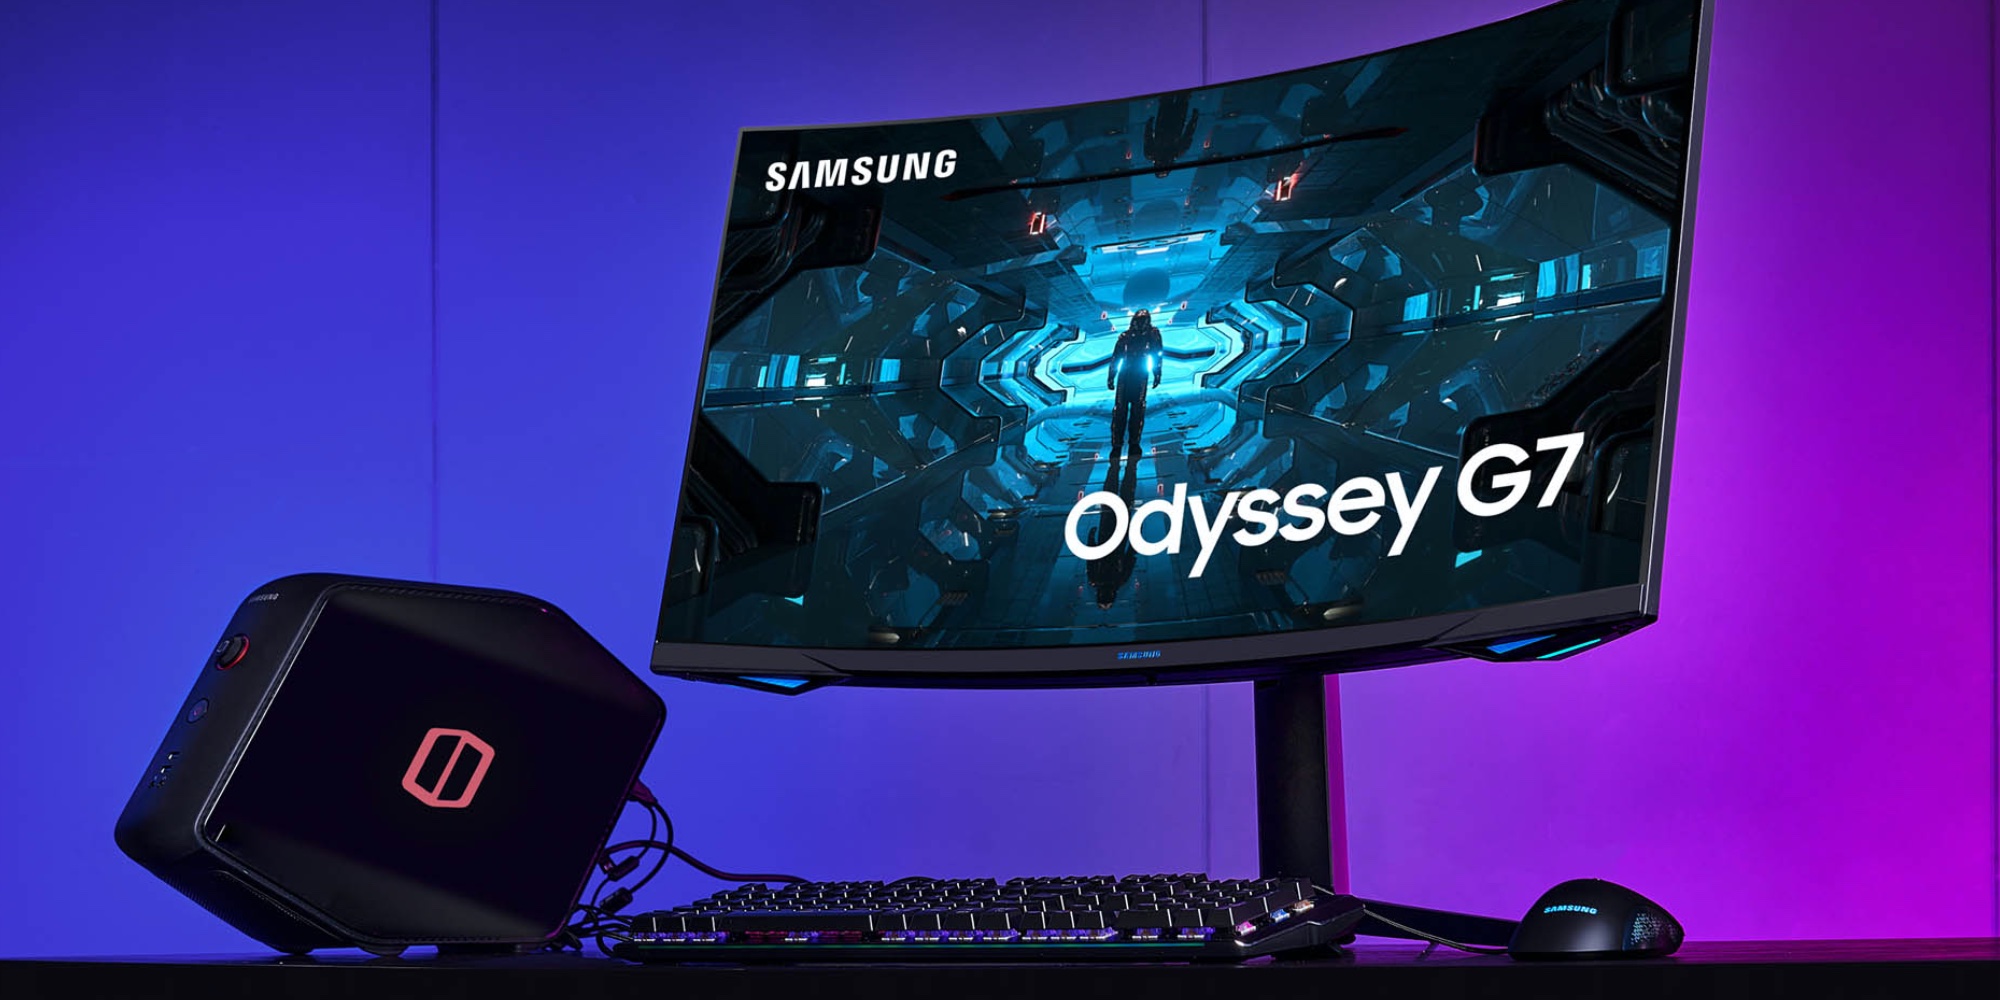 Samsung Odyssey G7 gaming monitors go up for pre-order - 9to5Toys